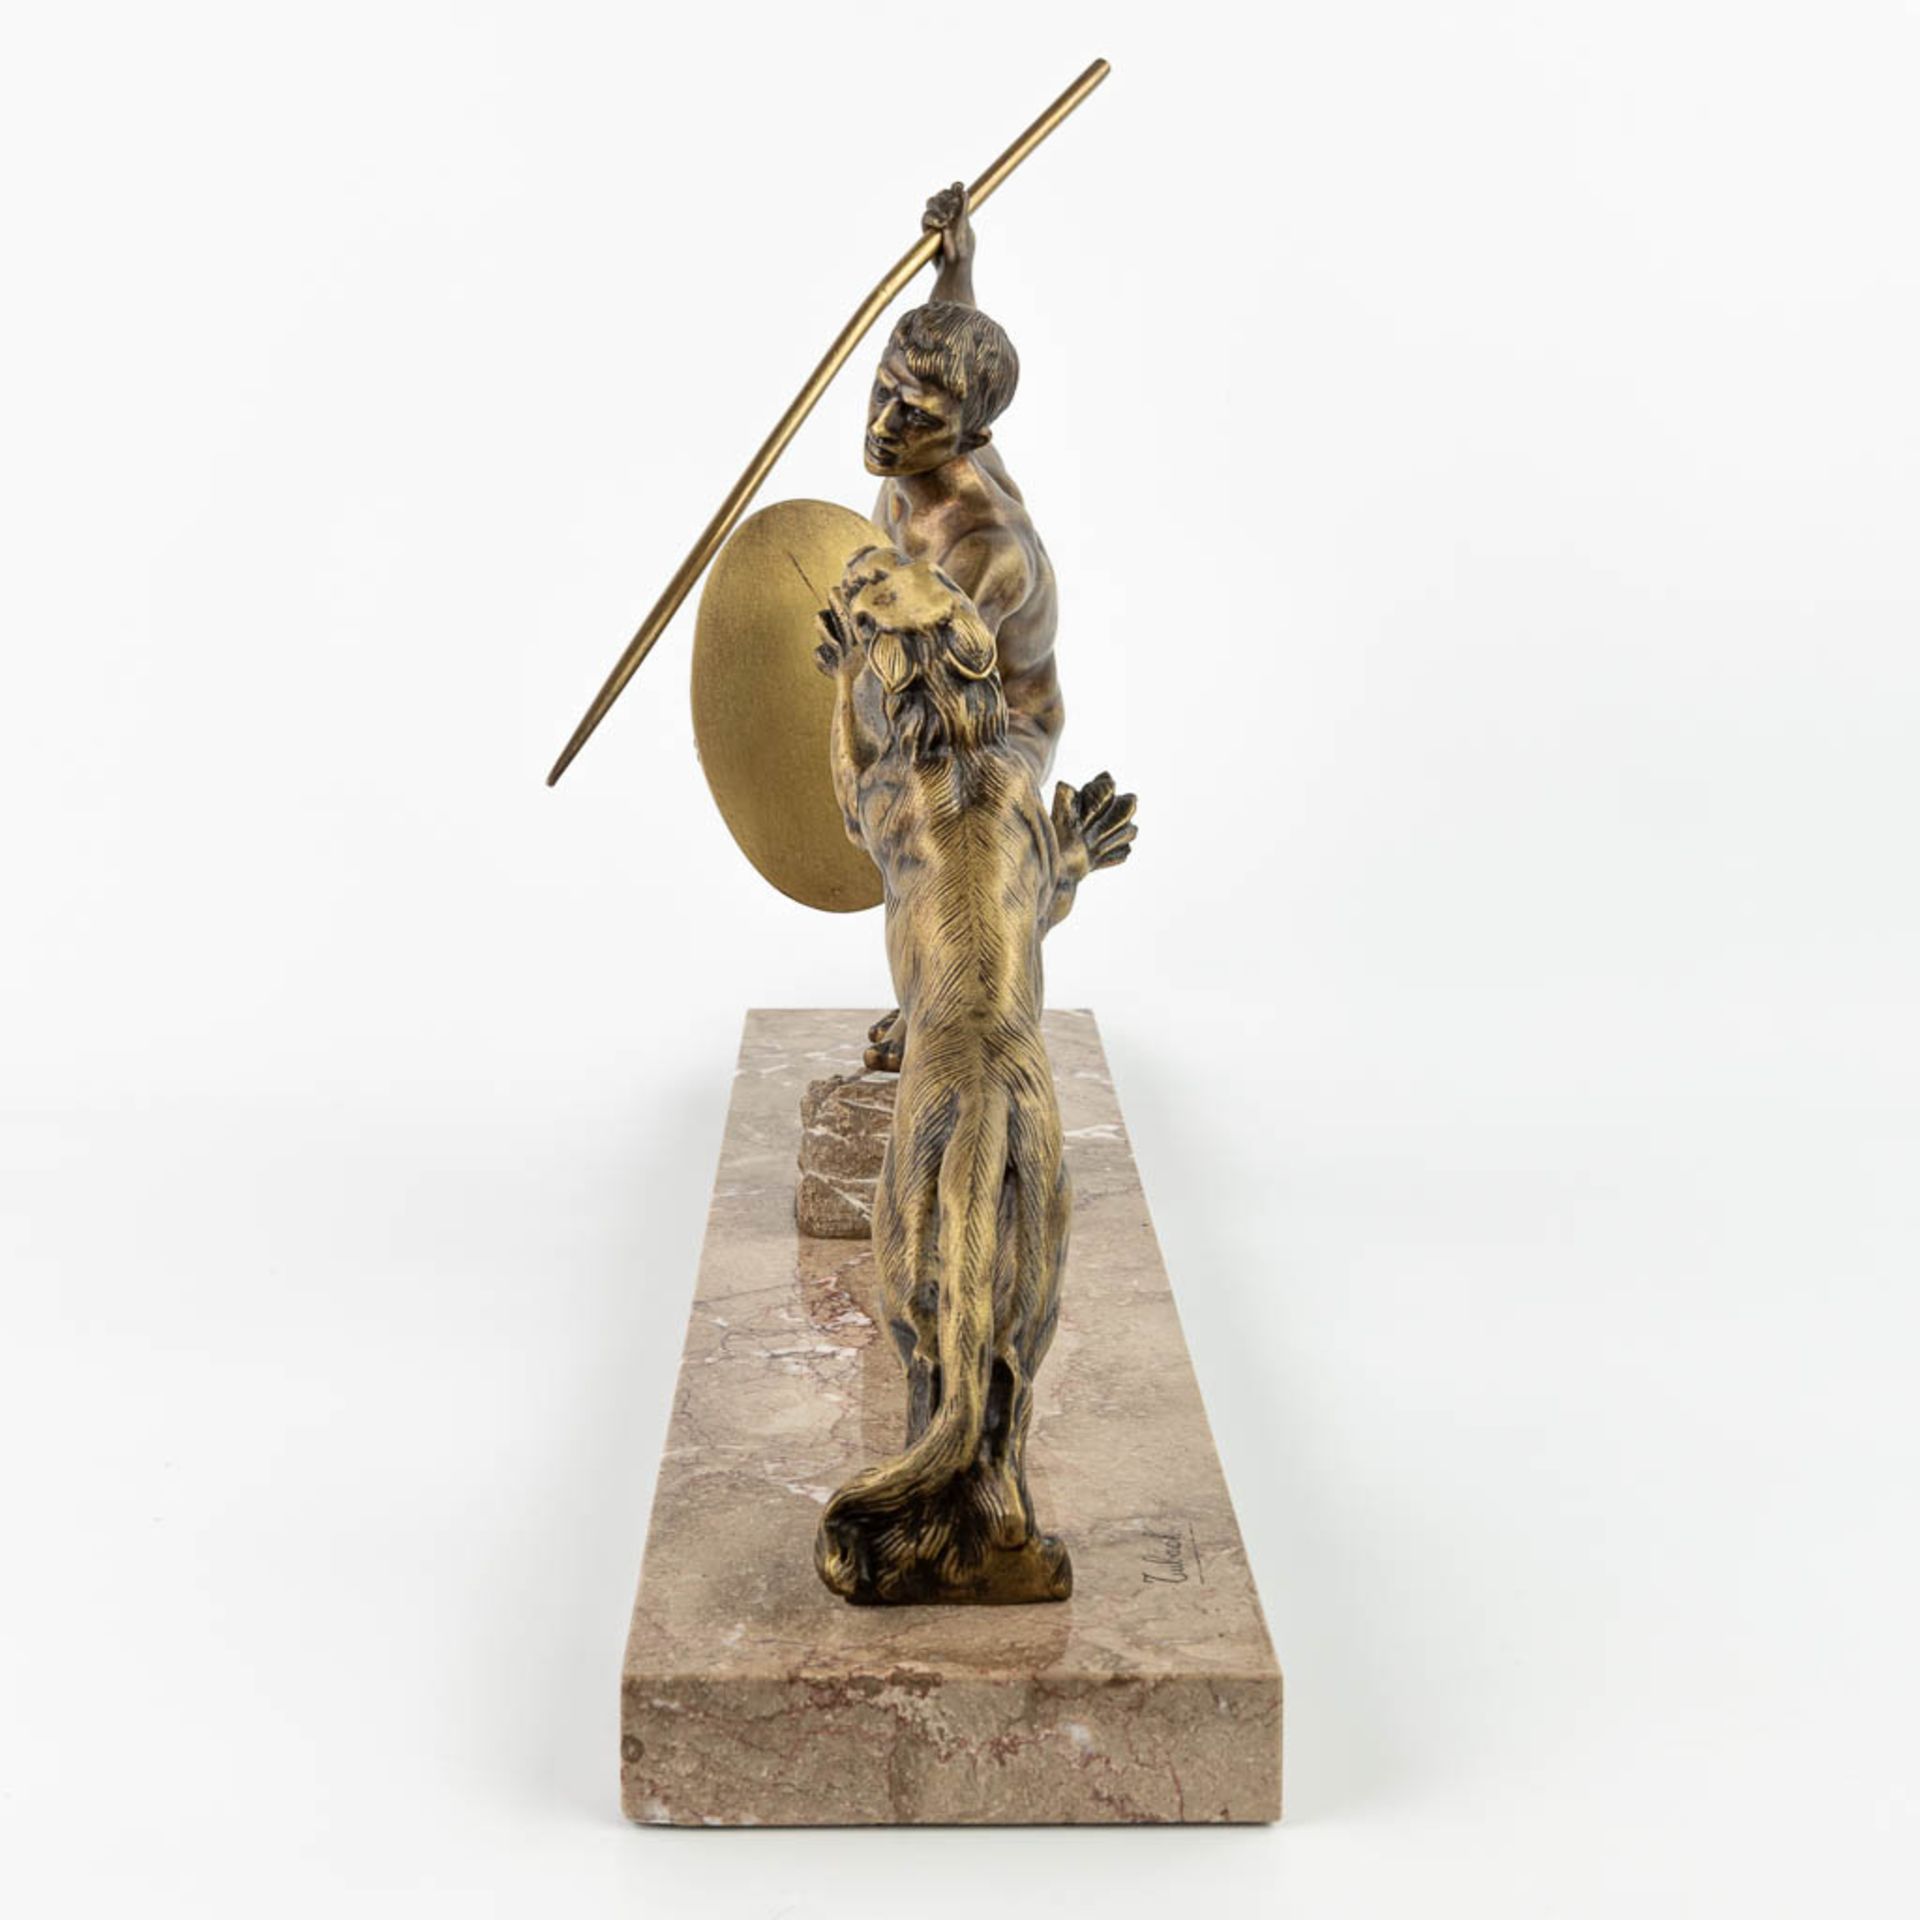 R. TUBACK (XIX-XX) 'Hunter with lion' an art deco statue made of bronze and mounted on a marble base - Image 5 of 11